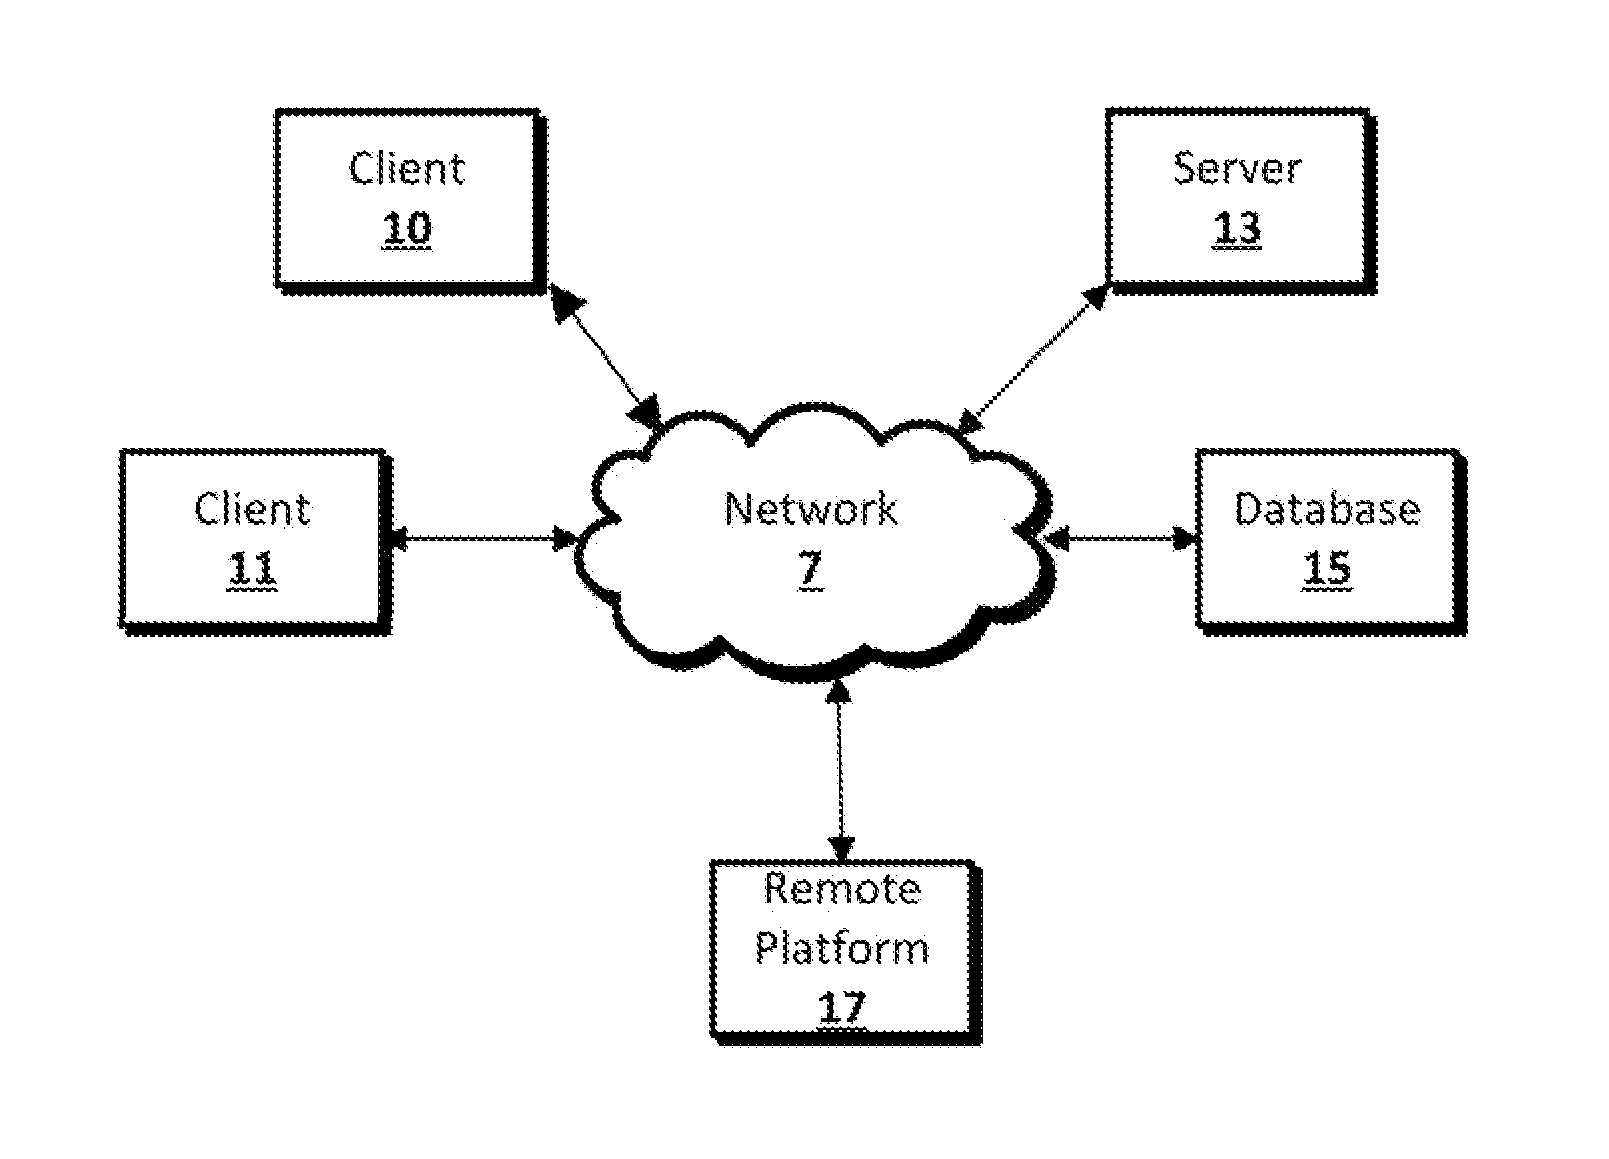 Authorization server access system